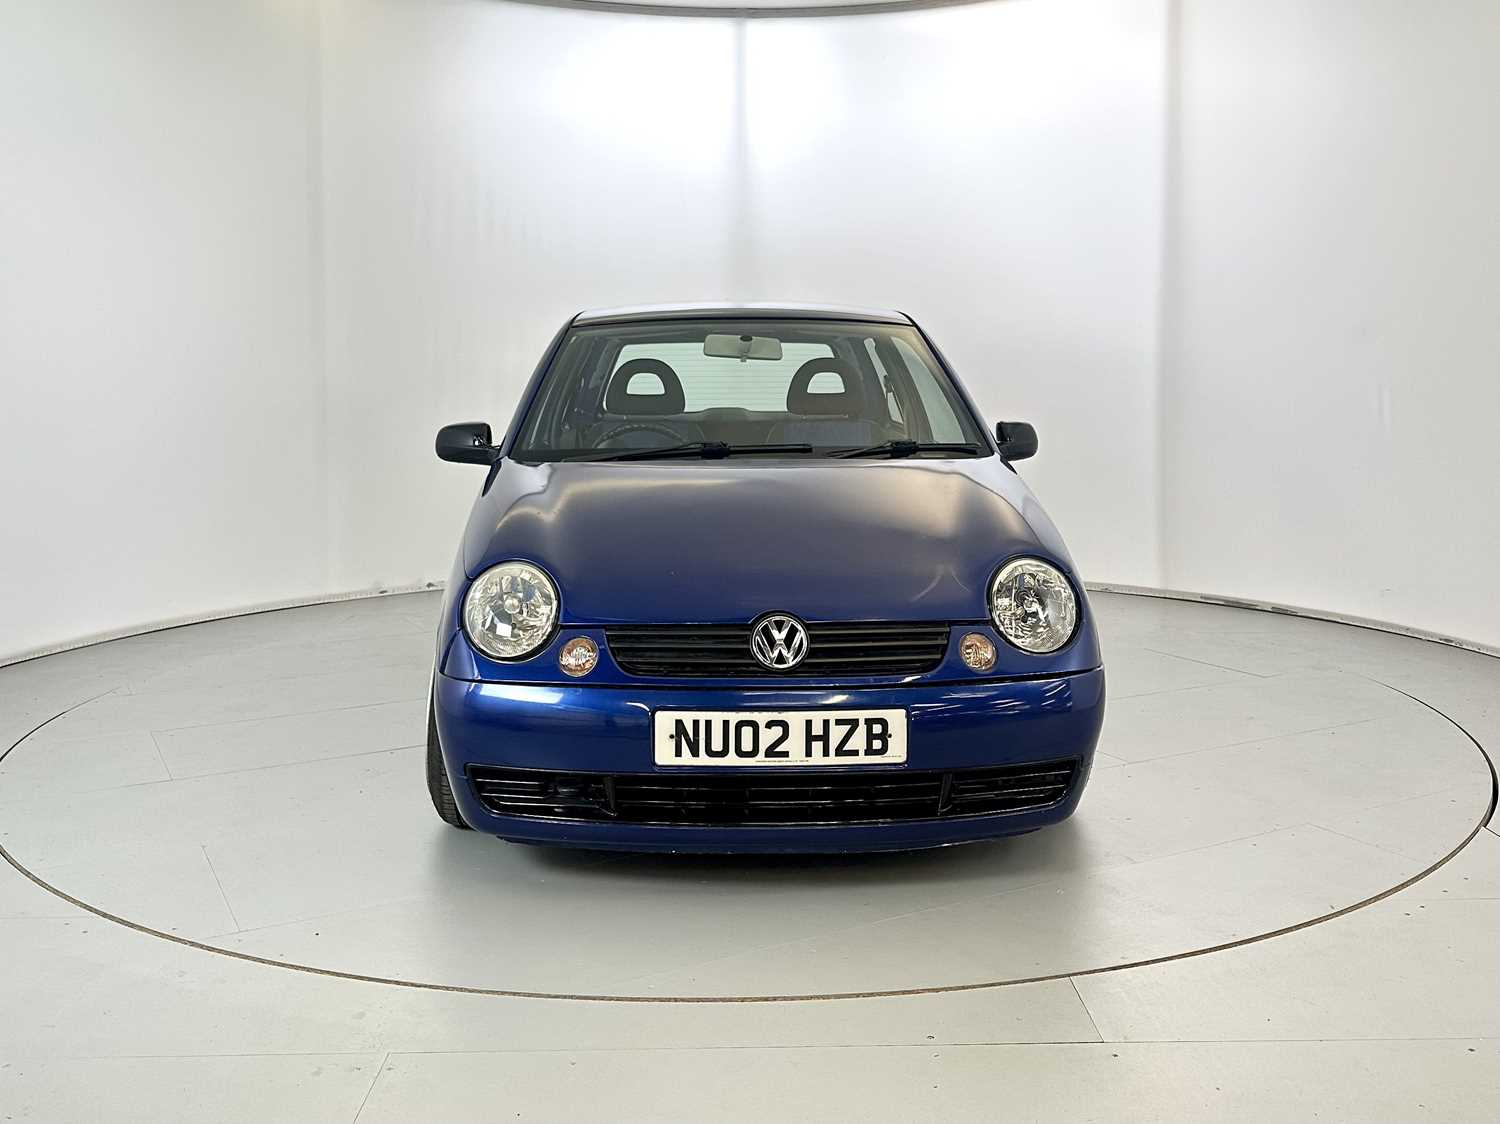 2002 Volkswagen Lupo - Image 2 of 28